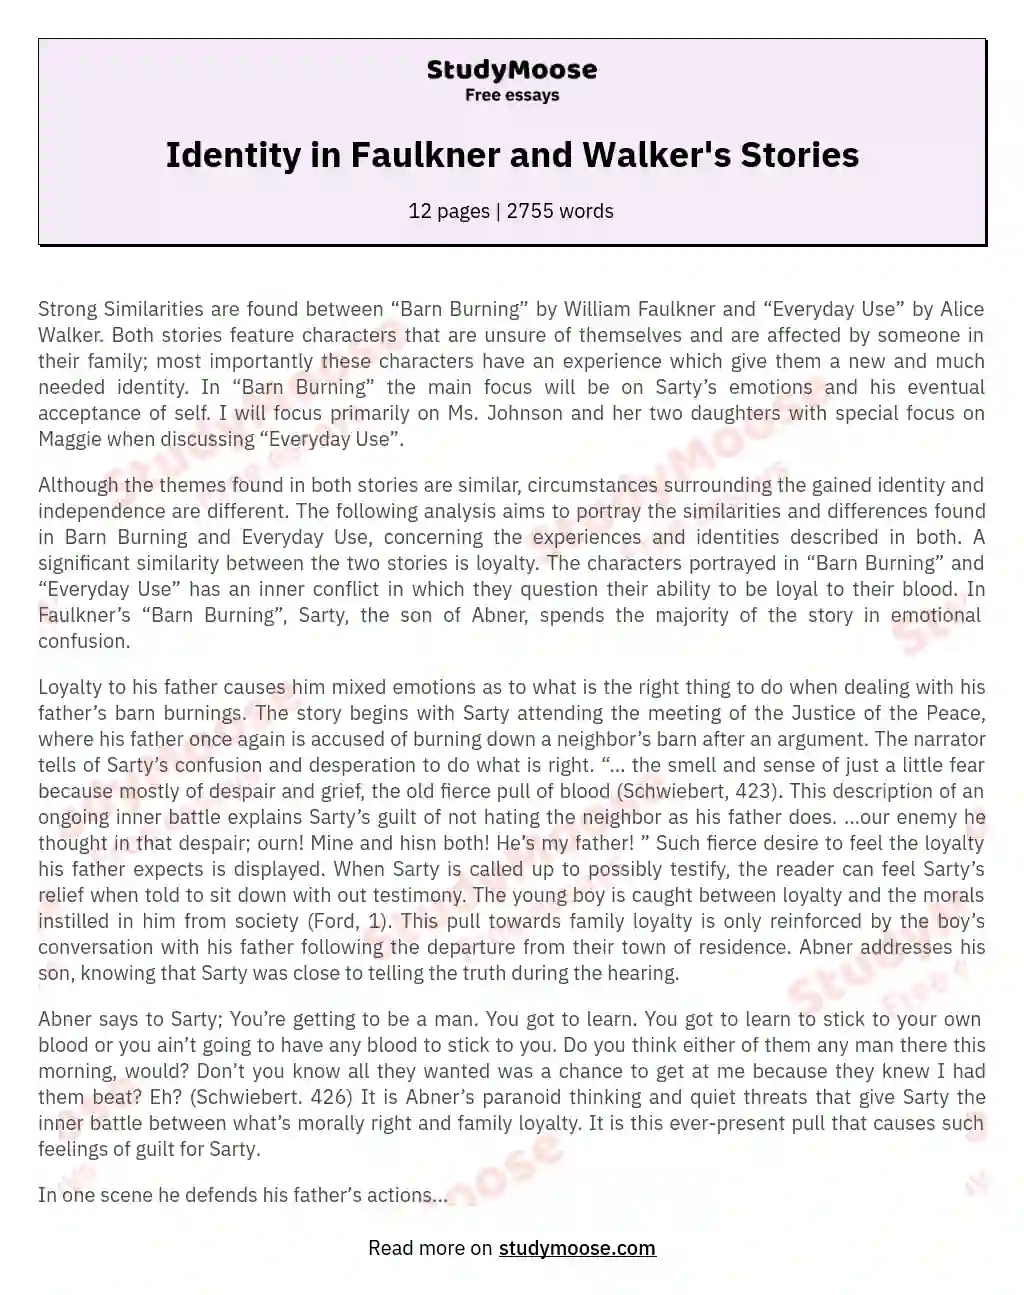 Identity in Faulkner and Walker's Stories essay